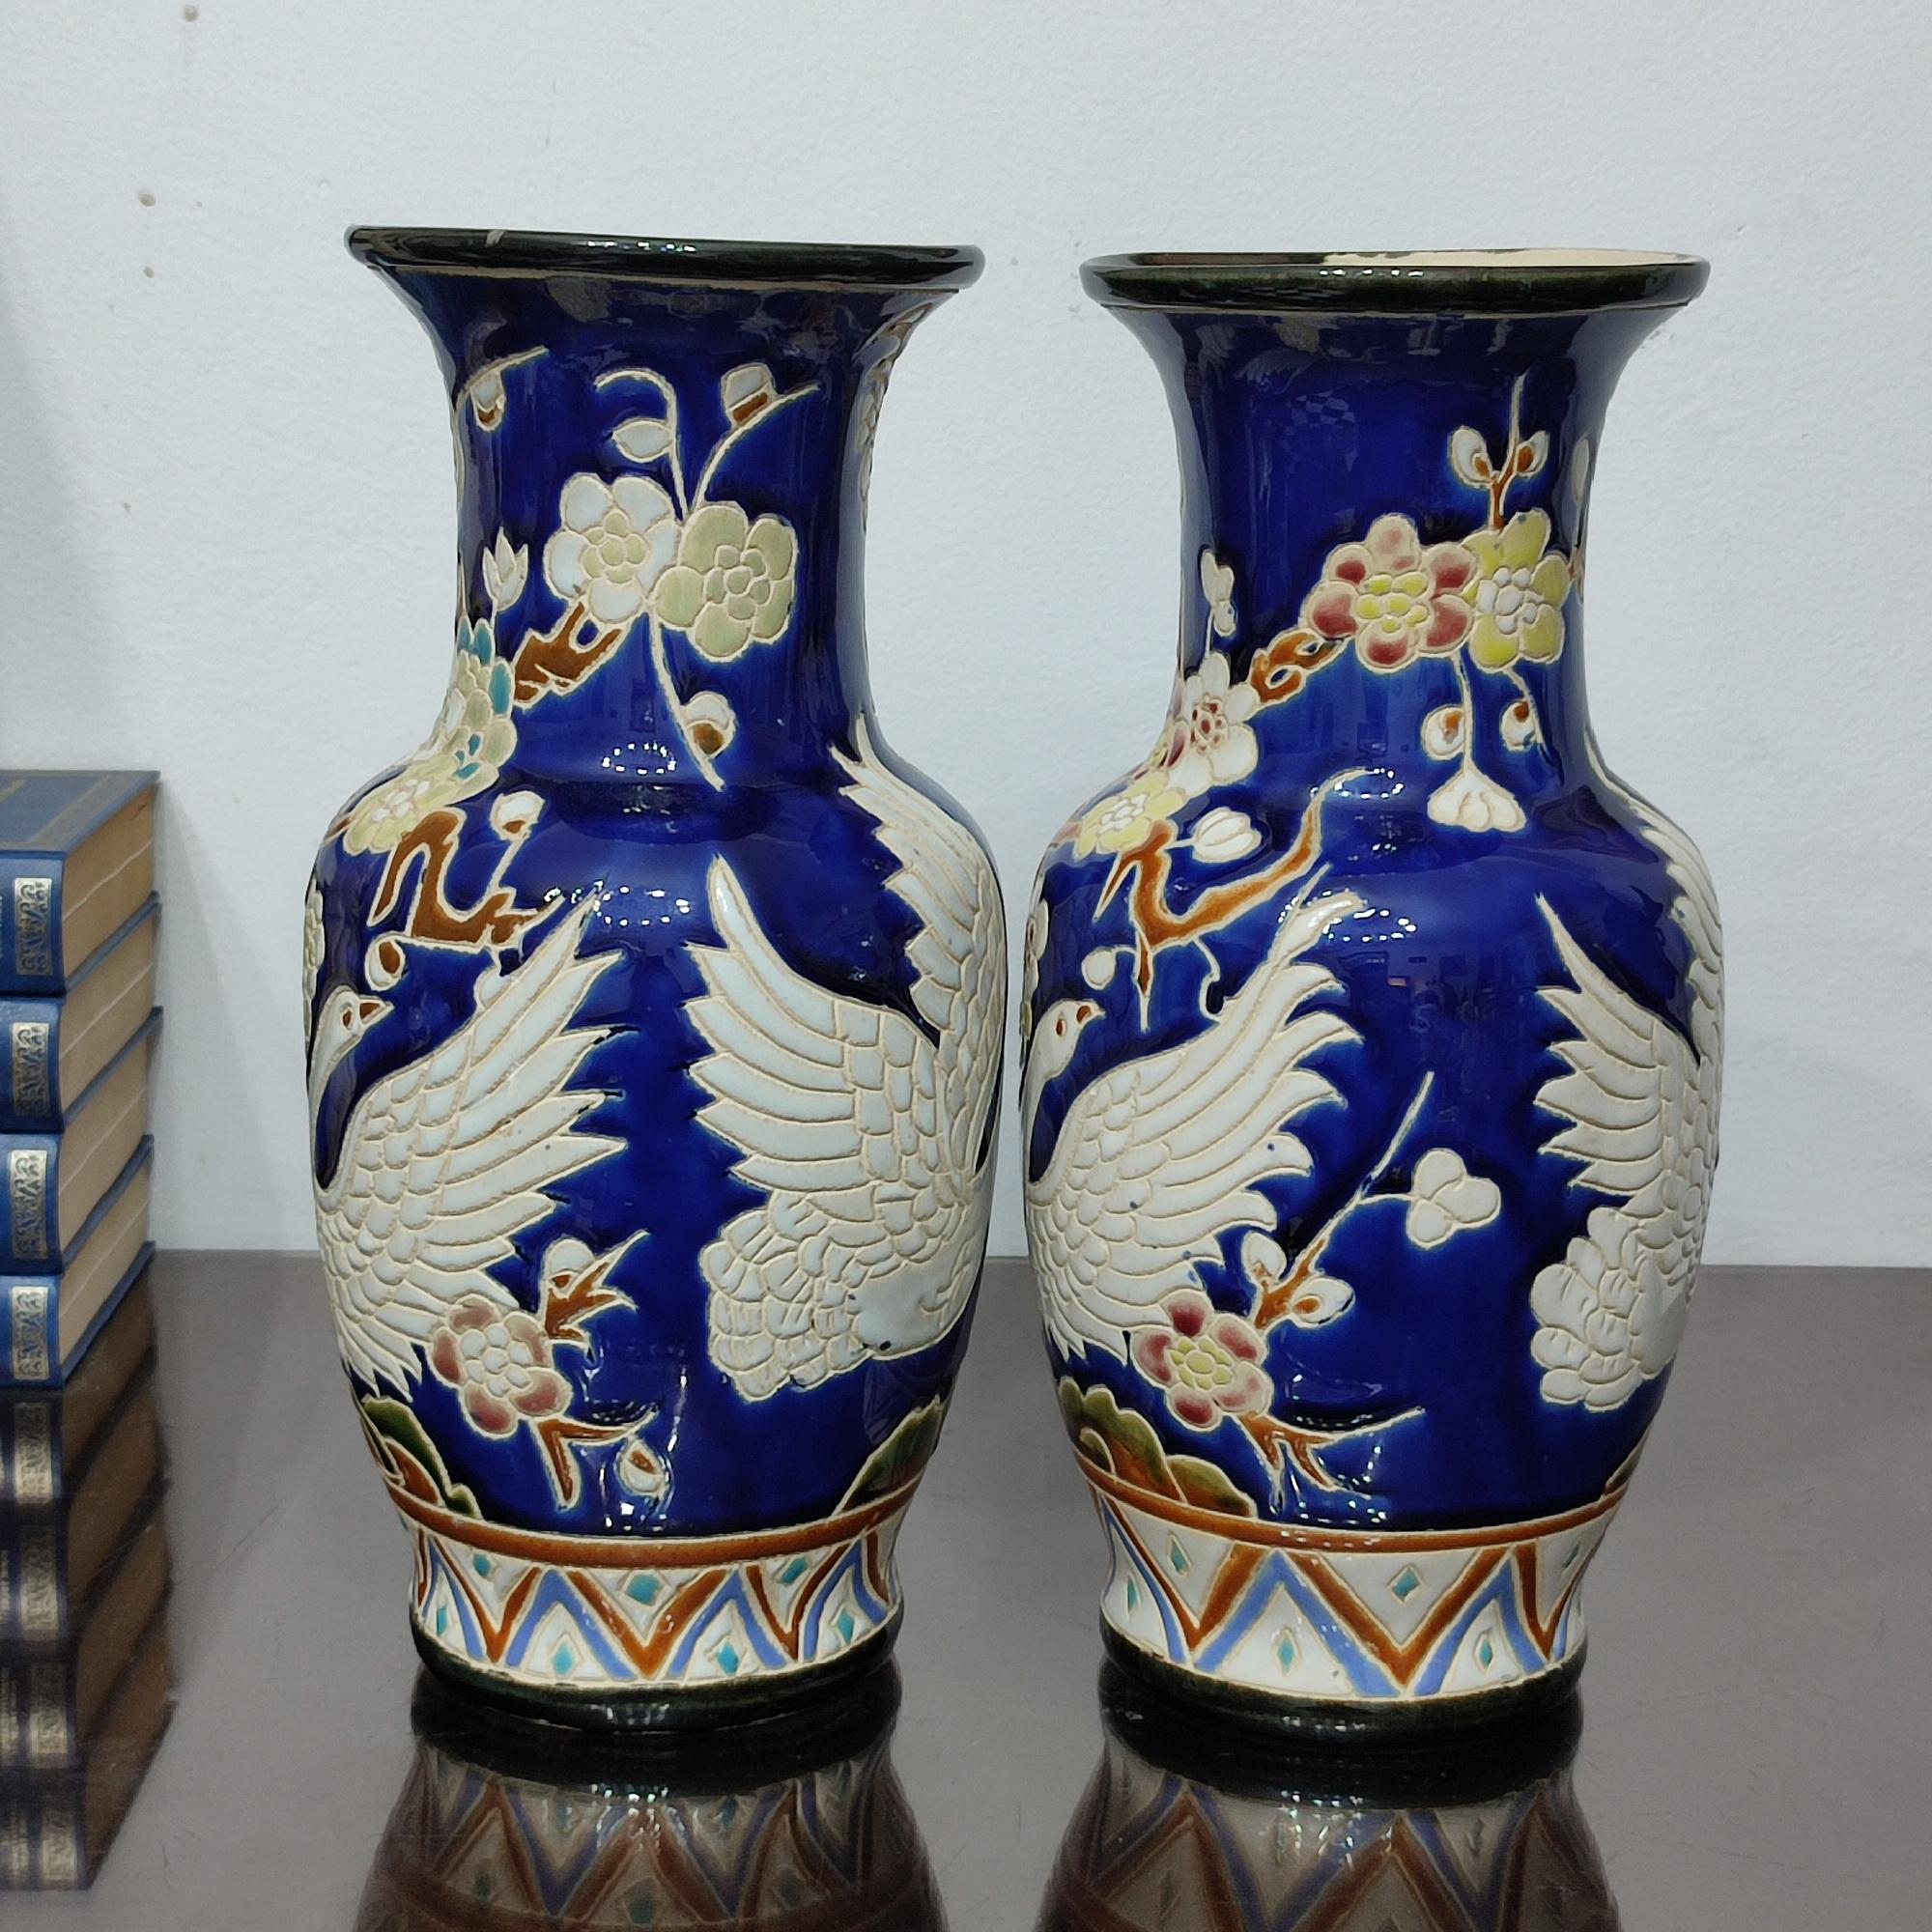 Glazed Pair of Ceramic Vases with Wonderful Flying Swans and Cherry Flowers Decor